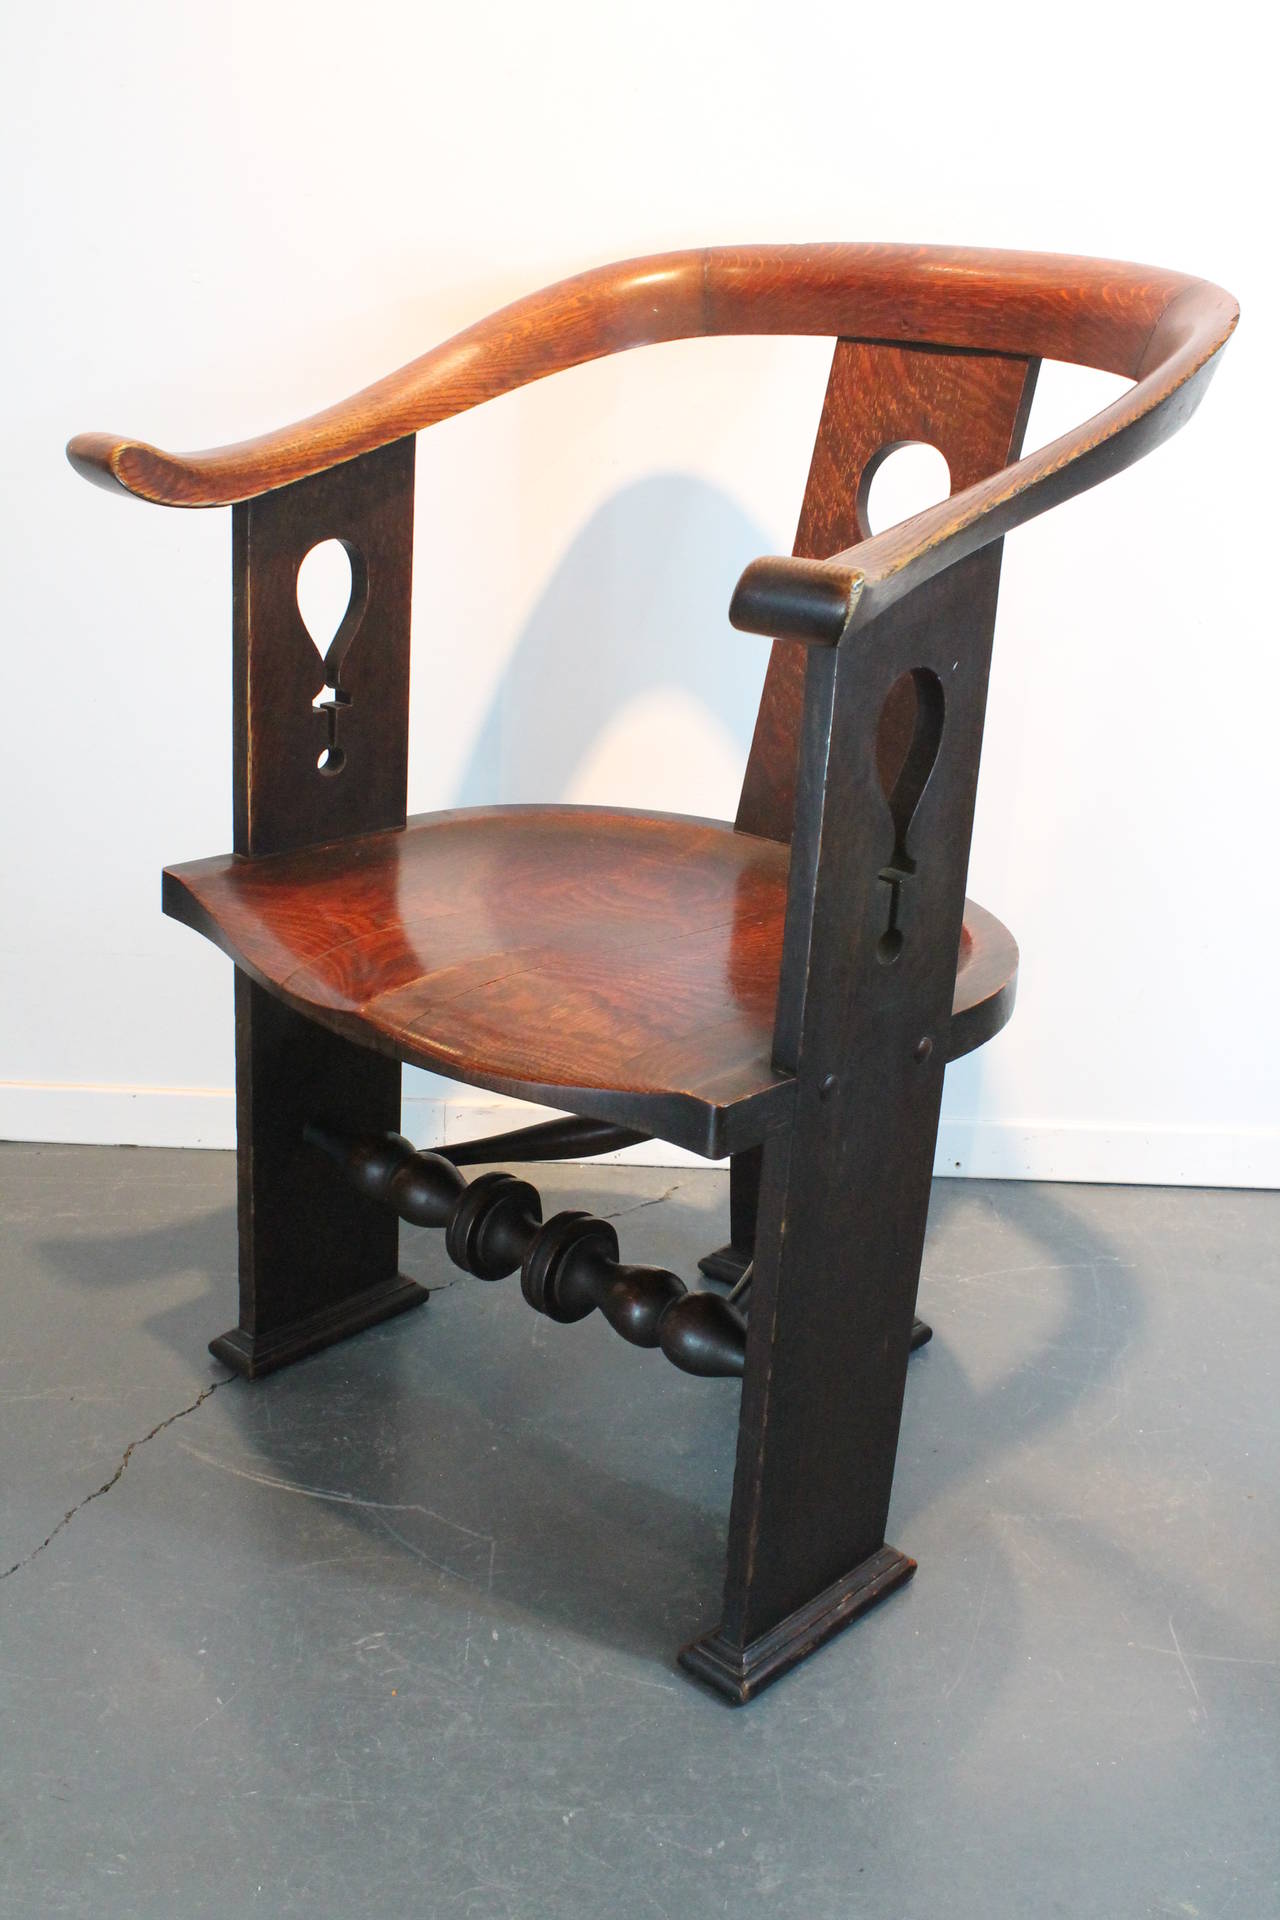 Unusual Arts and Crafts Sculptural Tripod Armchair In Good Condition For Sale In 3 Oaks, MI